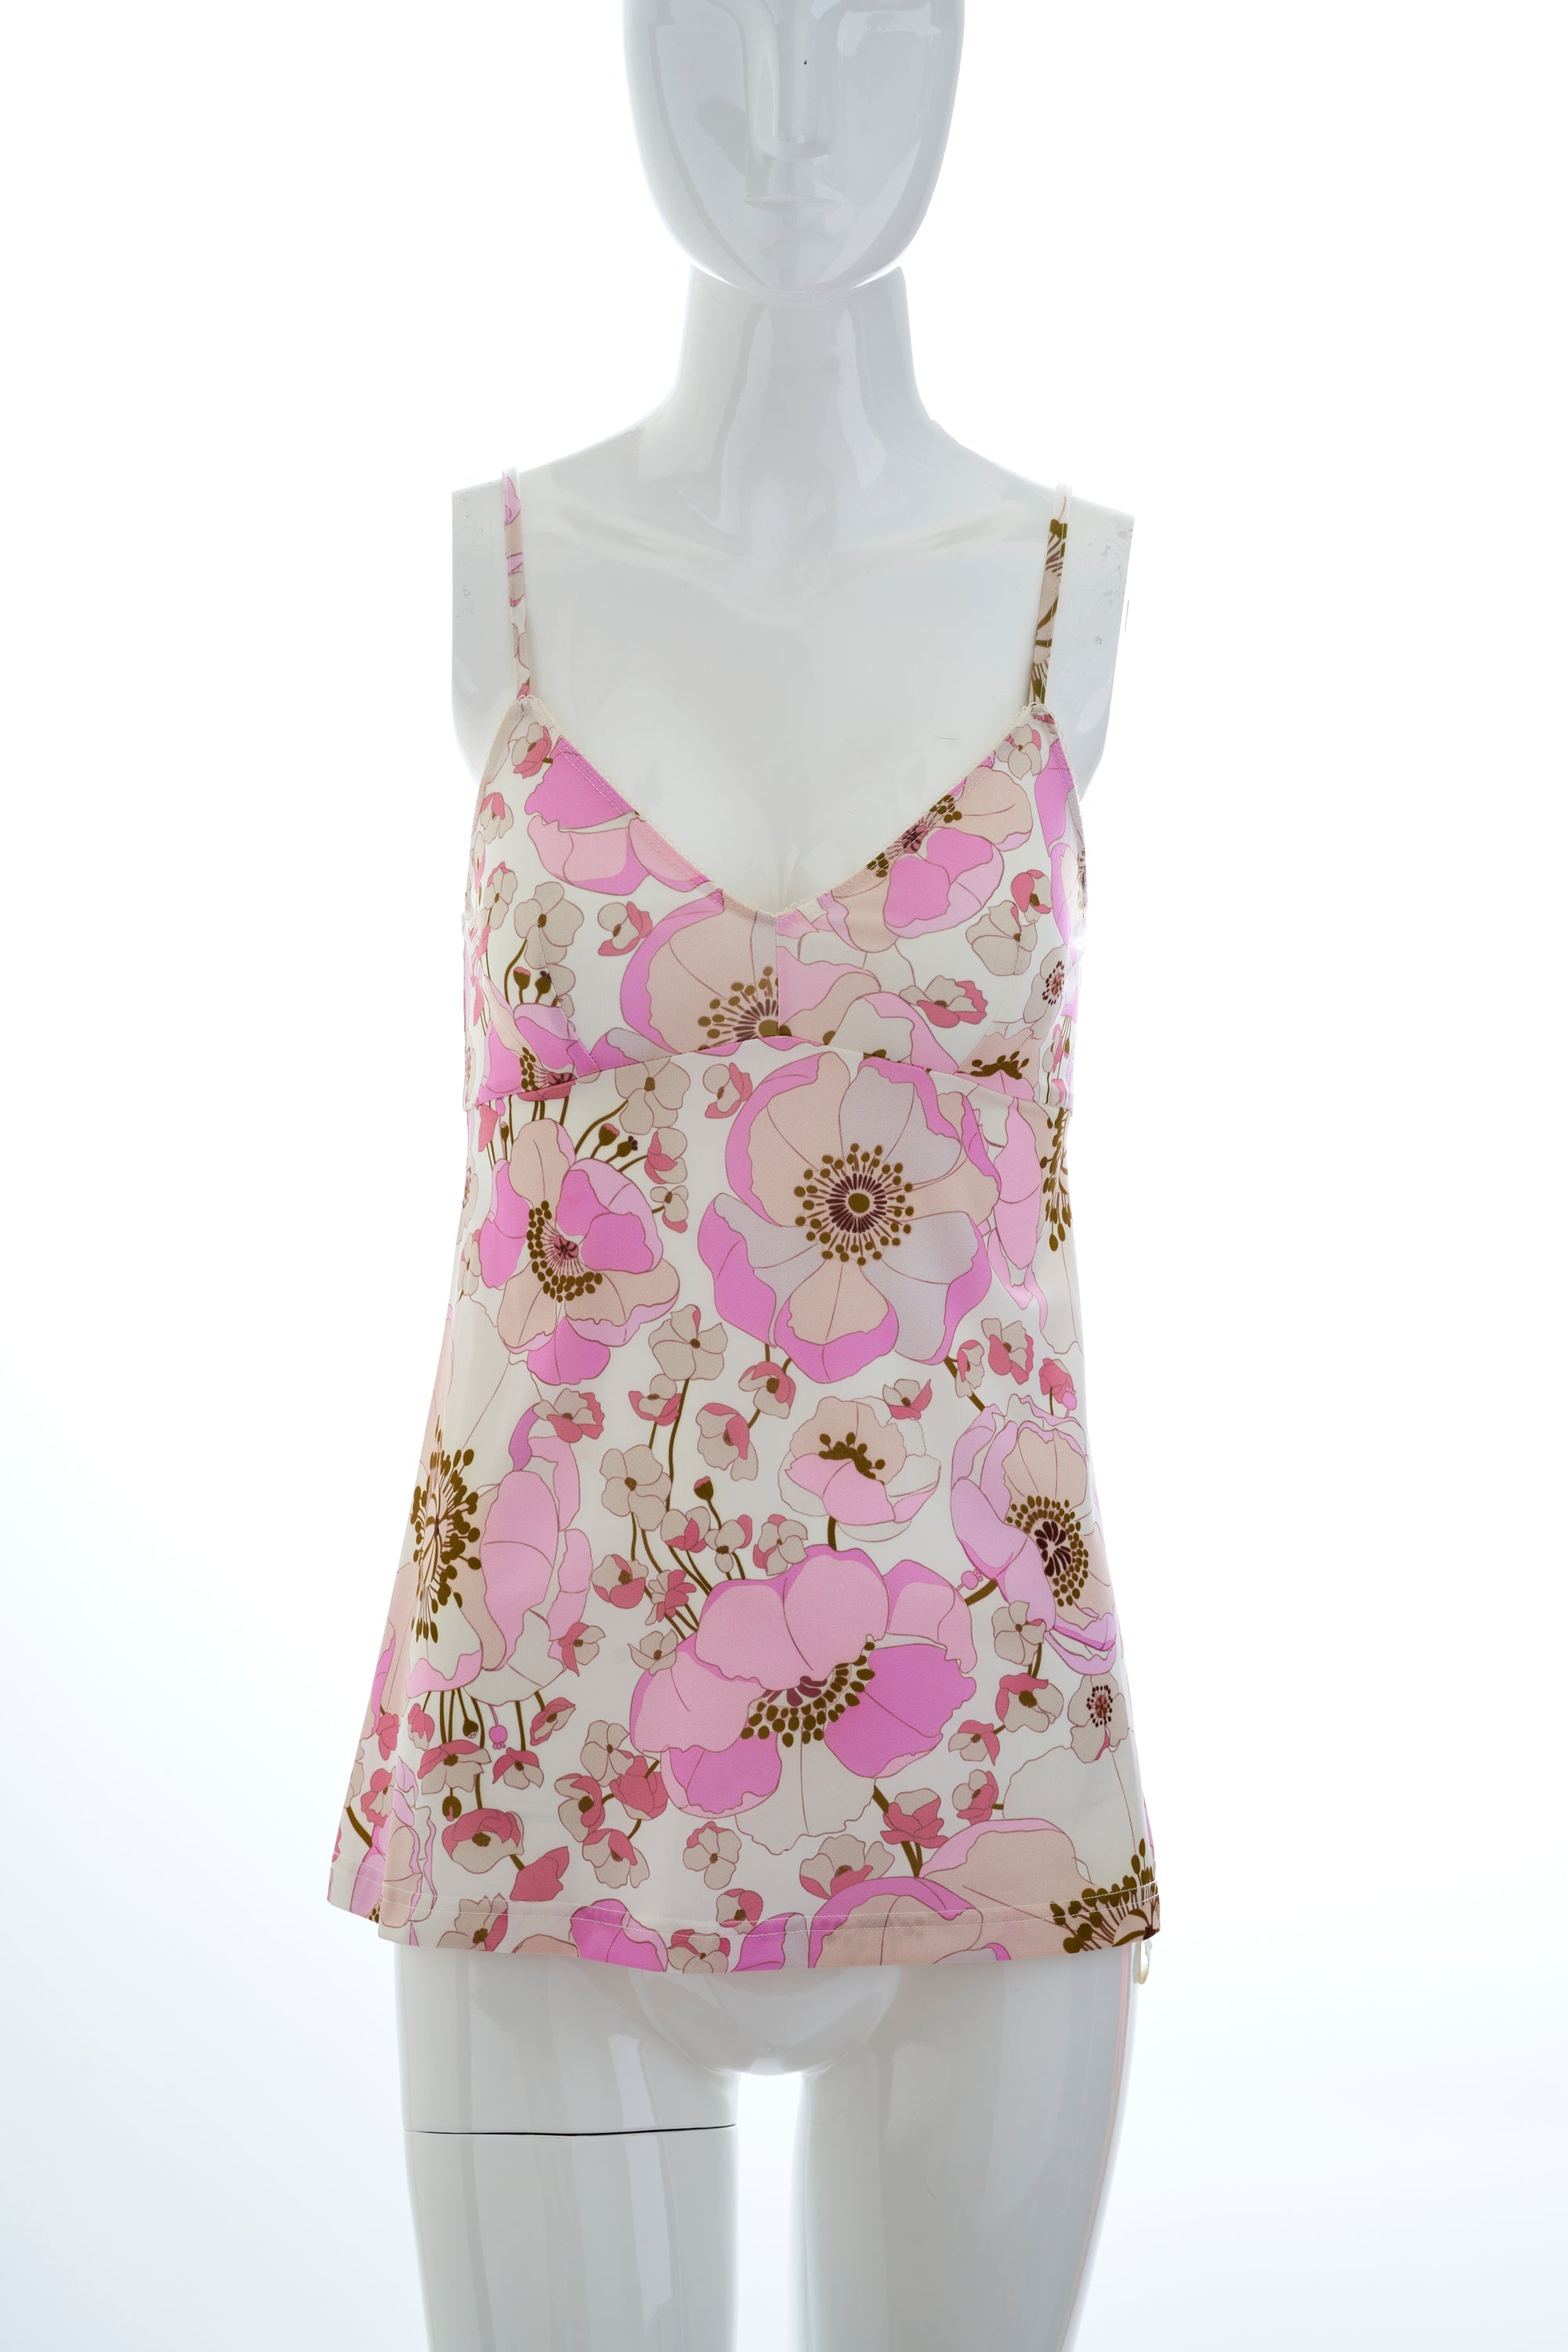 Zimmerman Pink Floral Top and Cami